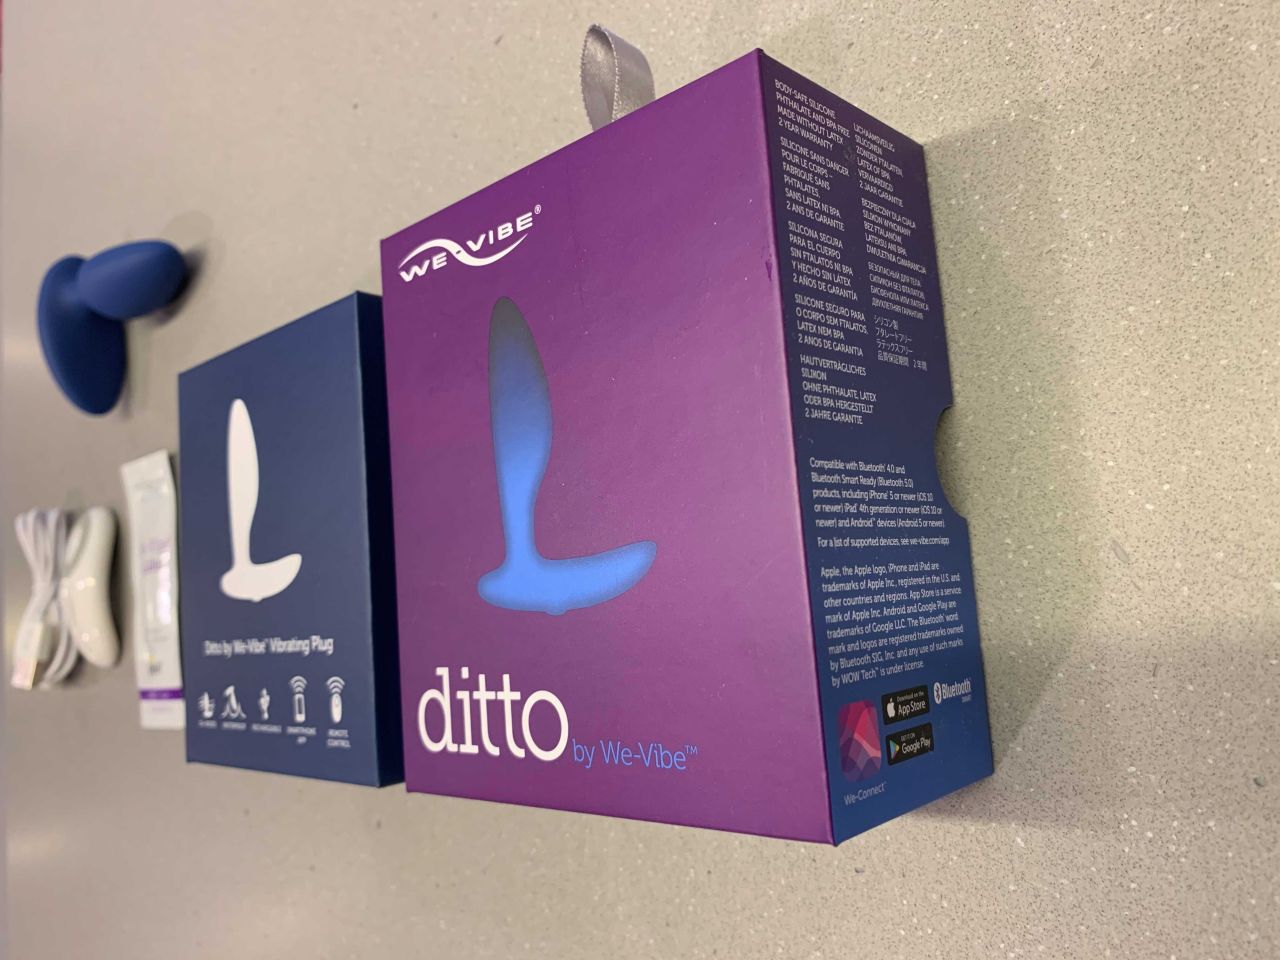 Unboxing The We-Vibe Ditto